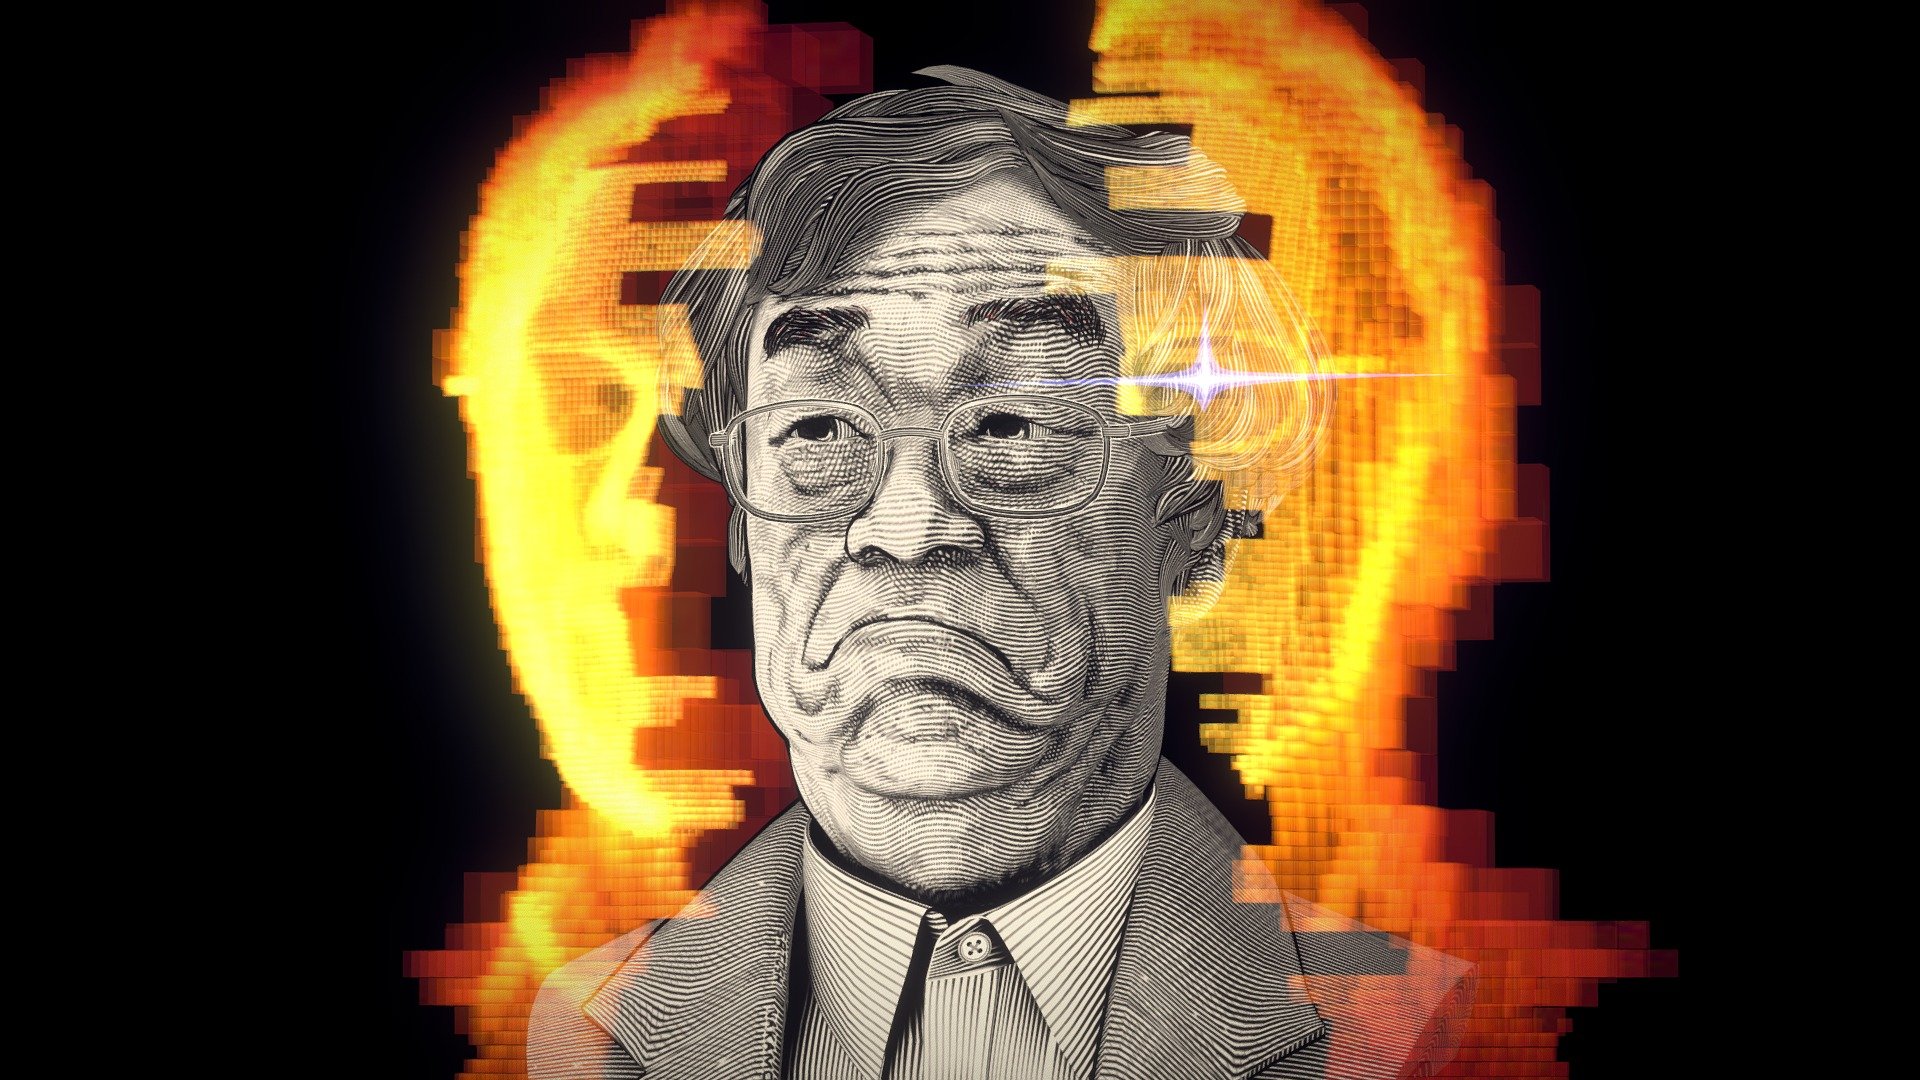 On this day in 2009,  the bitcoin network was created when Satoshi Nakamoto mined the starting block of the chain, known as the genesis block.

I am proud to present my latest 3D model: a bust of Dorian S. Nakamoto, a man whose name is similar to the Bitcoin inventor.  The texture of the bust is inspired by an engraving technique used on one dollar bills.  The model also includes a fractal blocks layer representing the true essence of Satoshi. 

If you appreciate this model and would like to show your support, you can donate some bitcoin to my wallet at 
&ldquo;1K5hRD3Vq1r3GGV8UqxTyRC5fS3cKJuUji